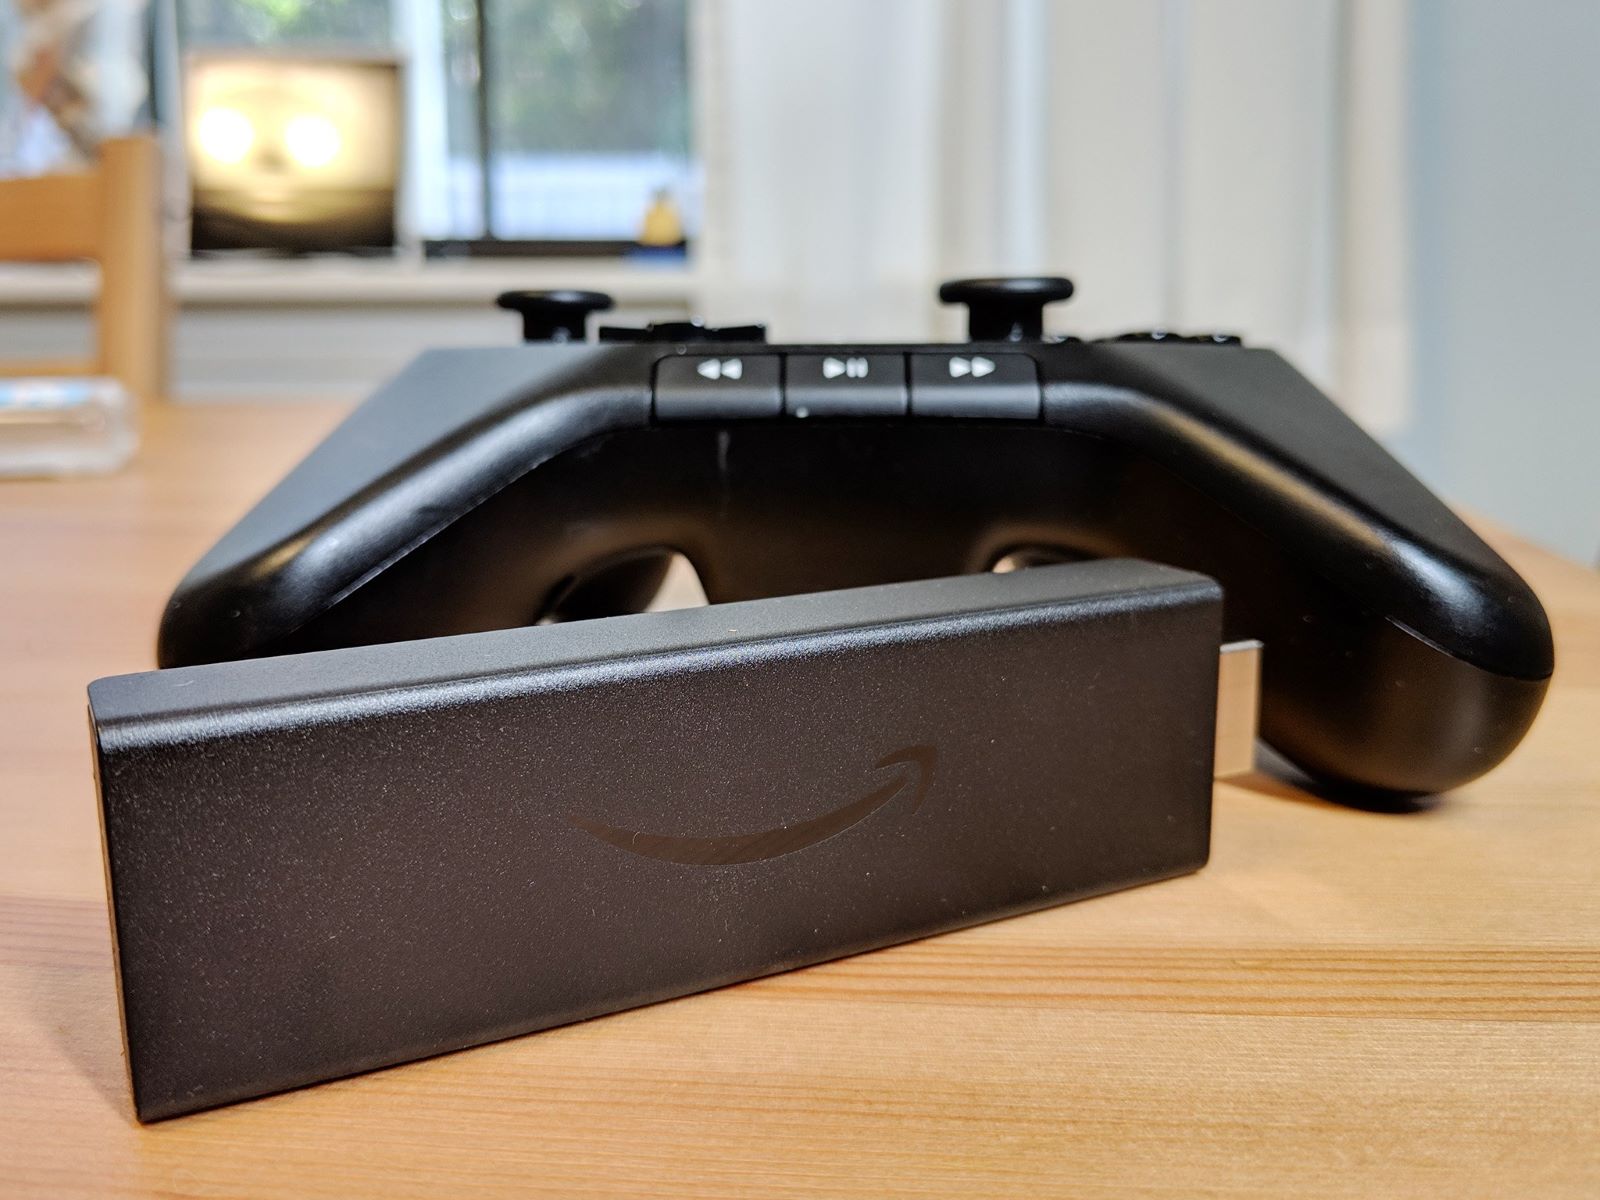 How To Sync Game Controller To Amazon Fire TV